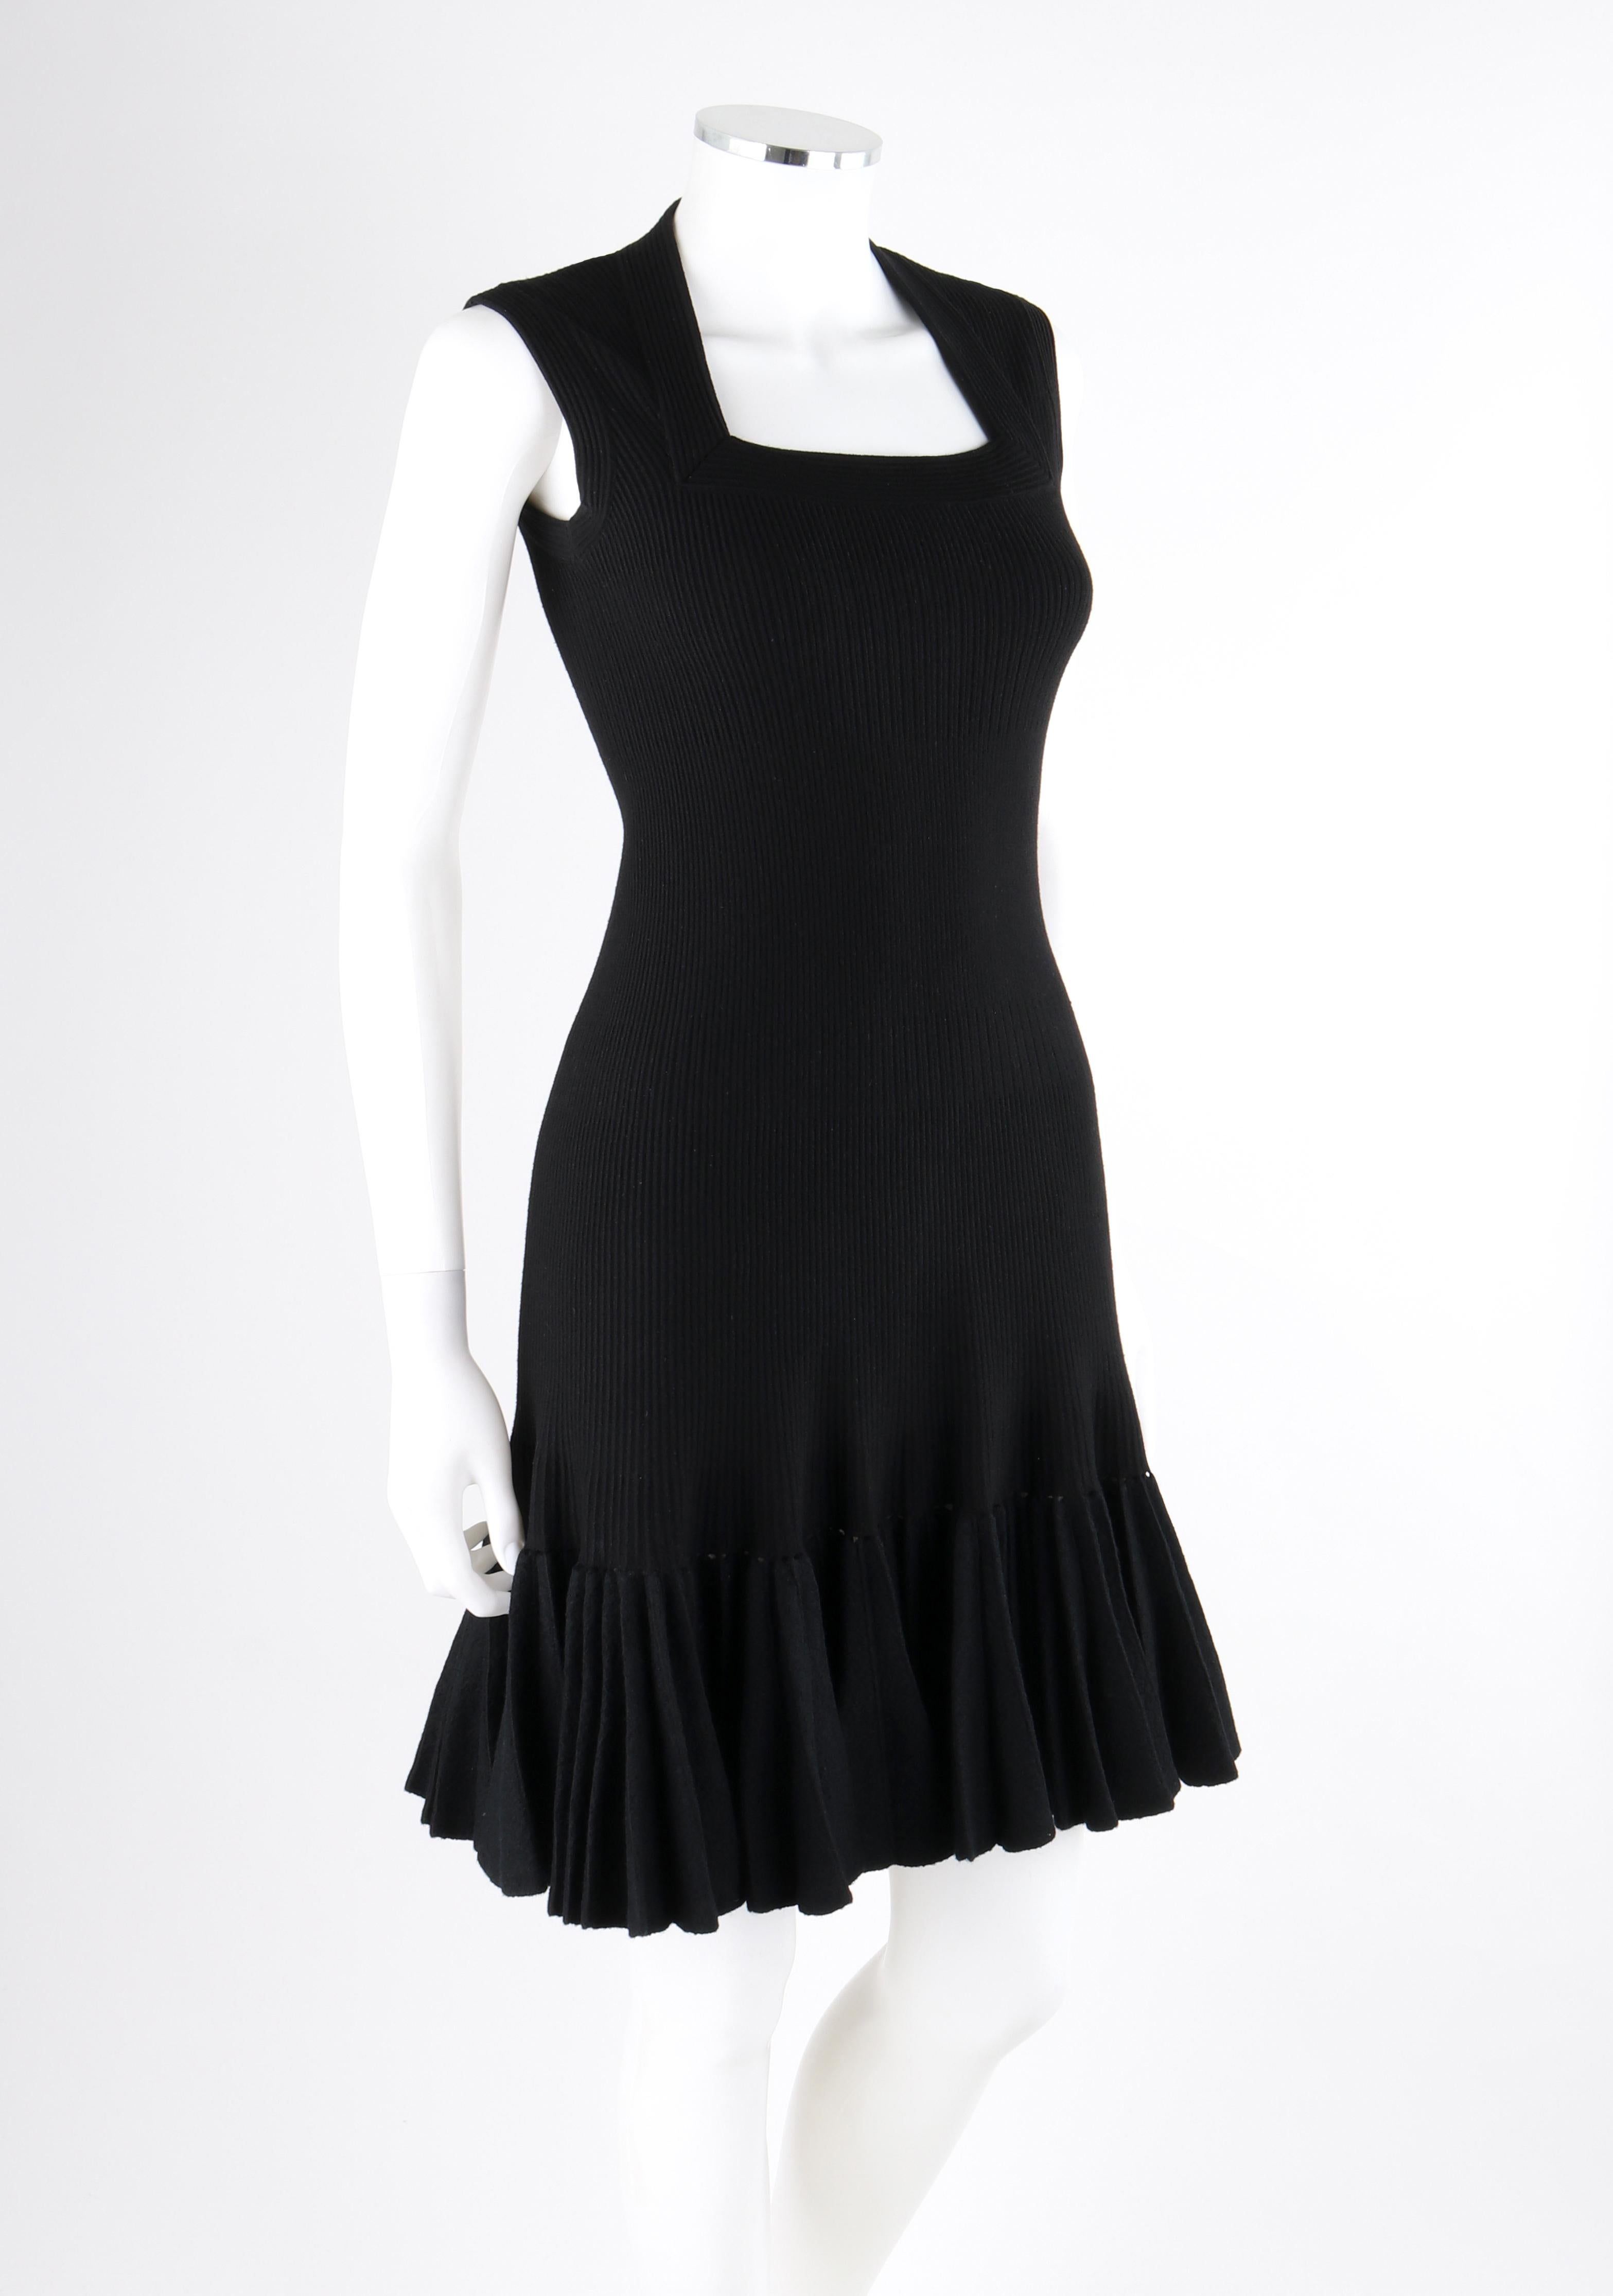 ALAIA Paris c.2010 Black Wool Ribbed Knit Pleated Hem Fit & Flare Mini Dress In Good Condition For Sale In Thiensville, WI